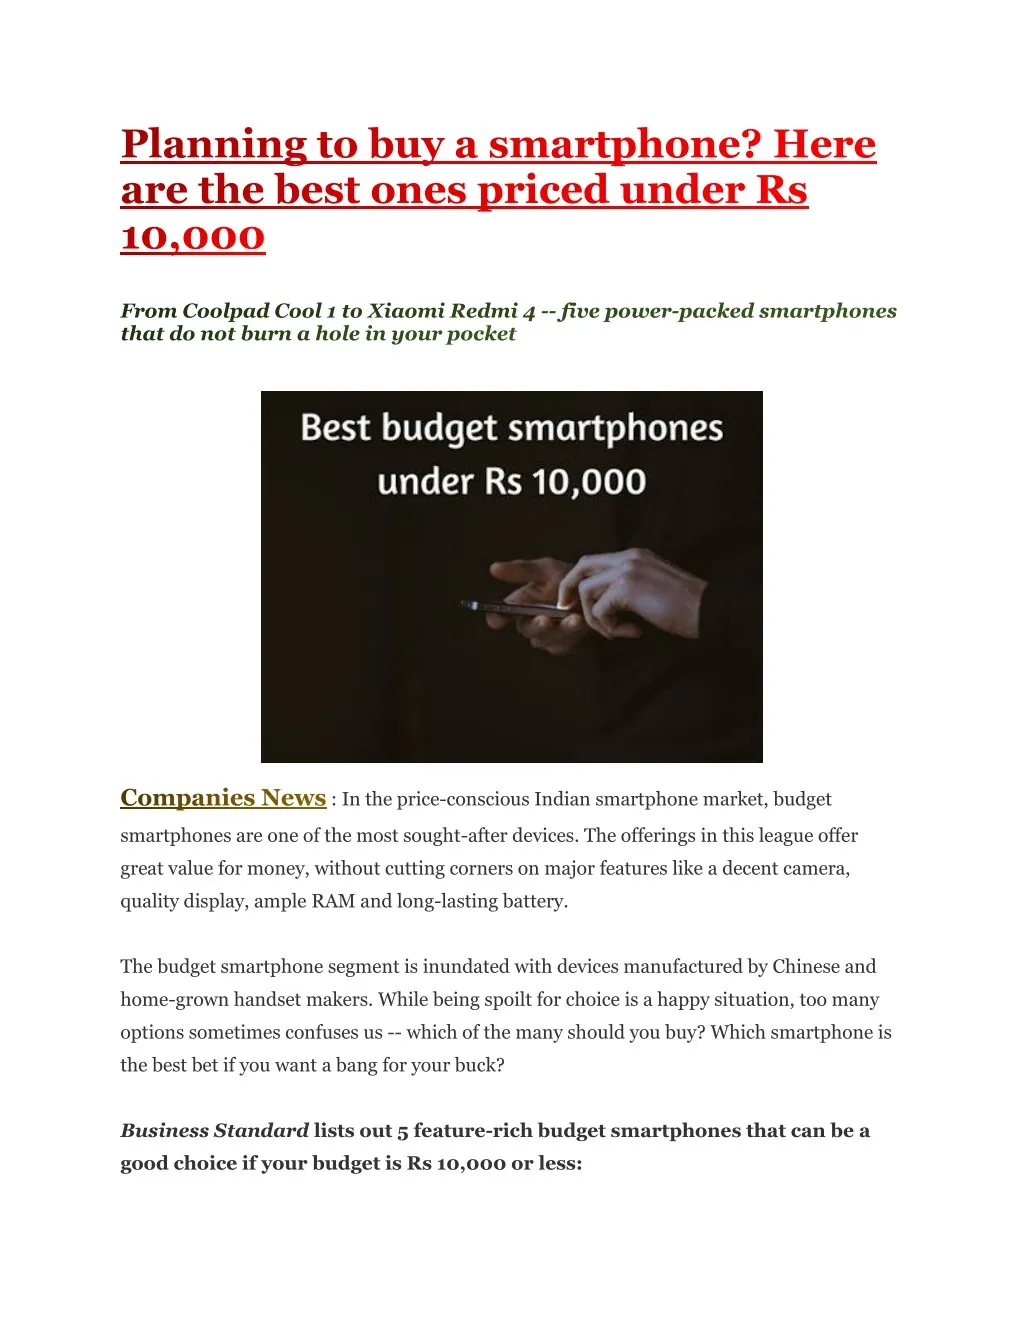 in the price conscious indian smartphone market